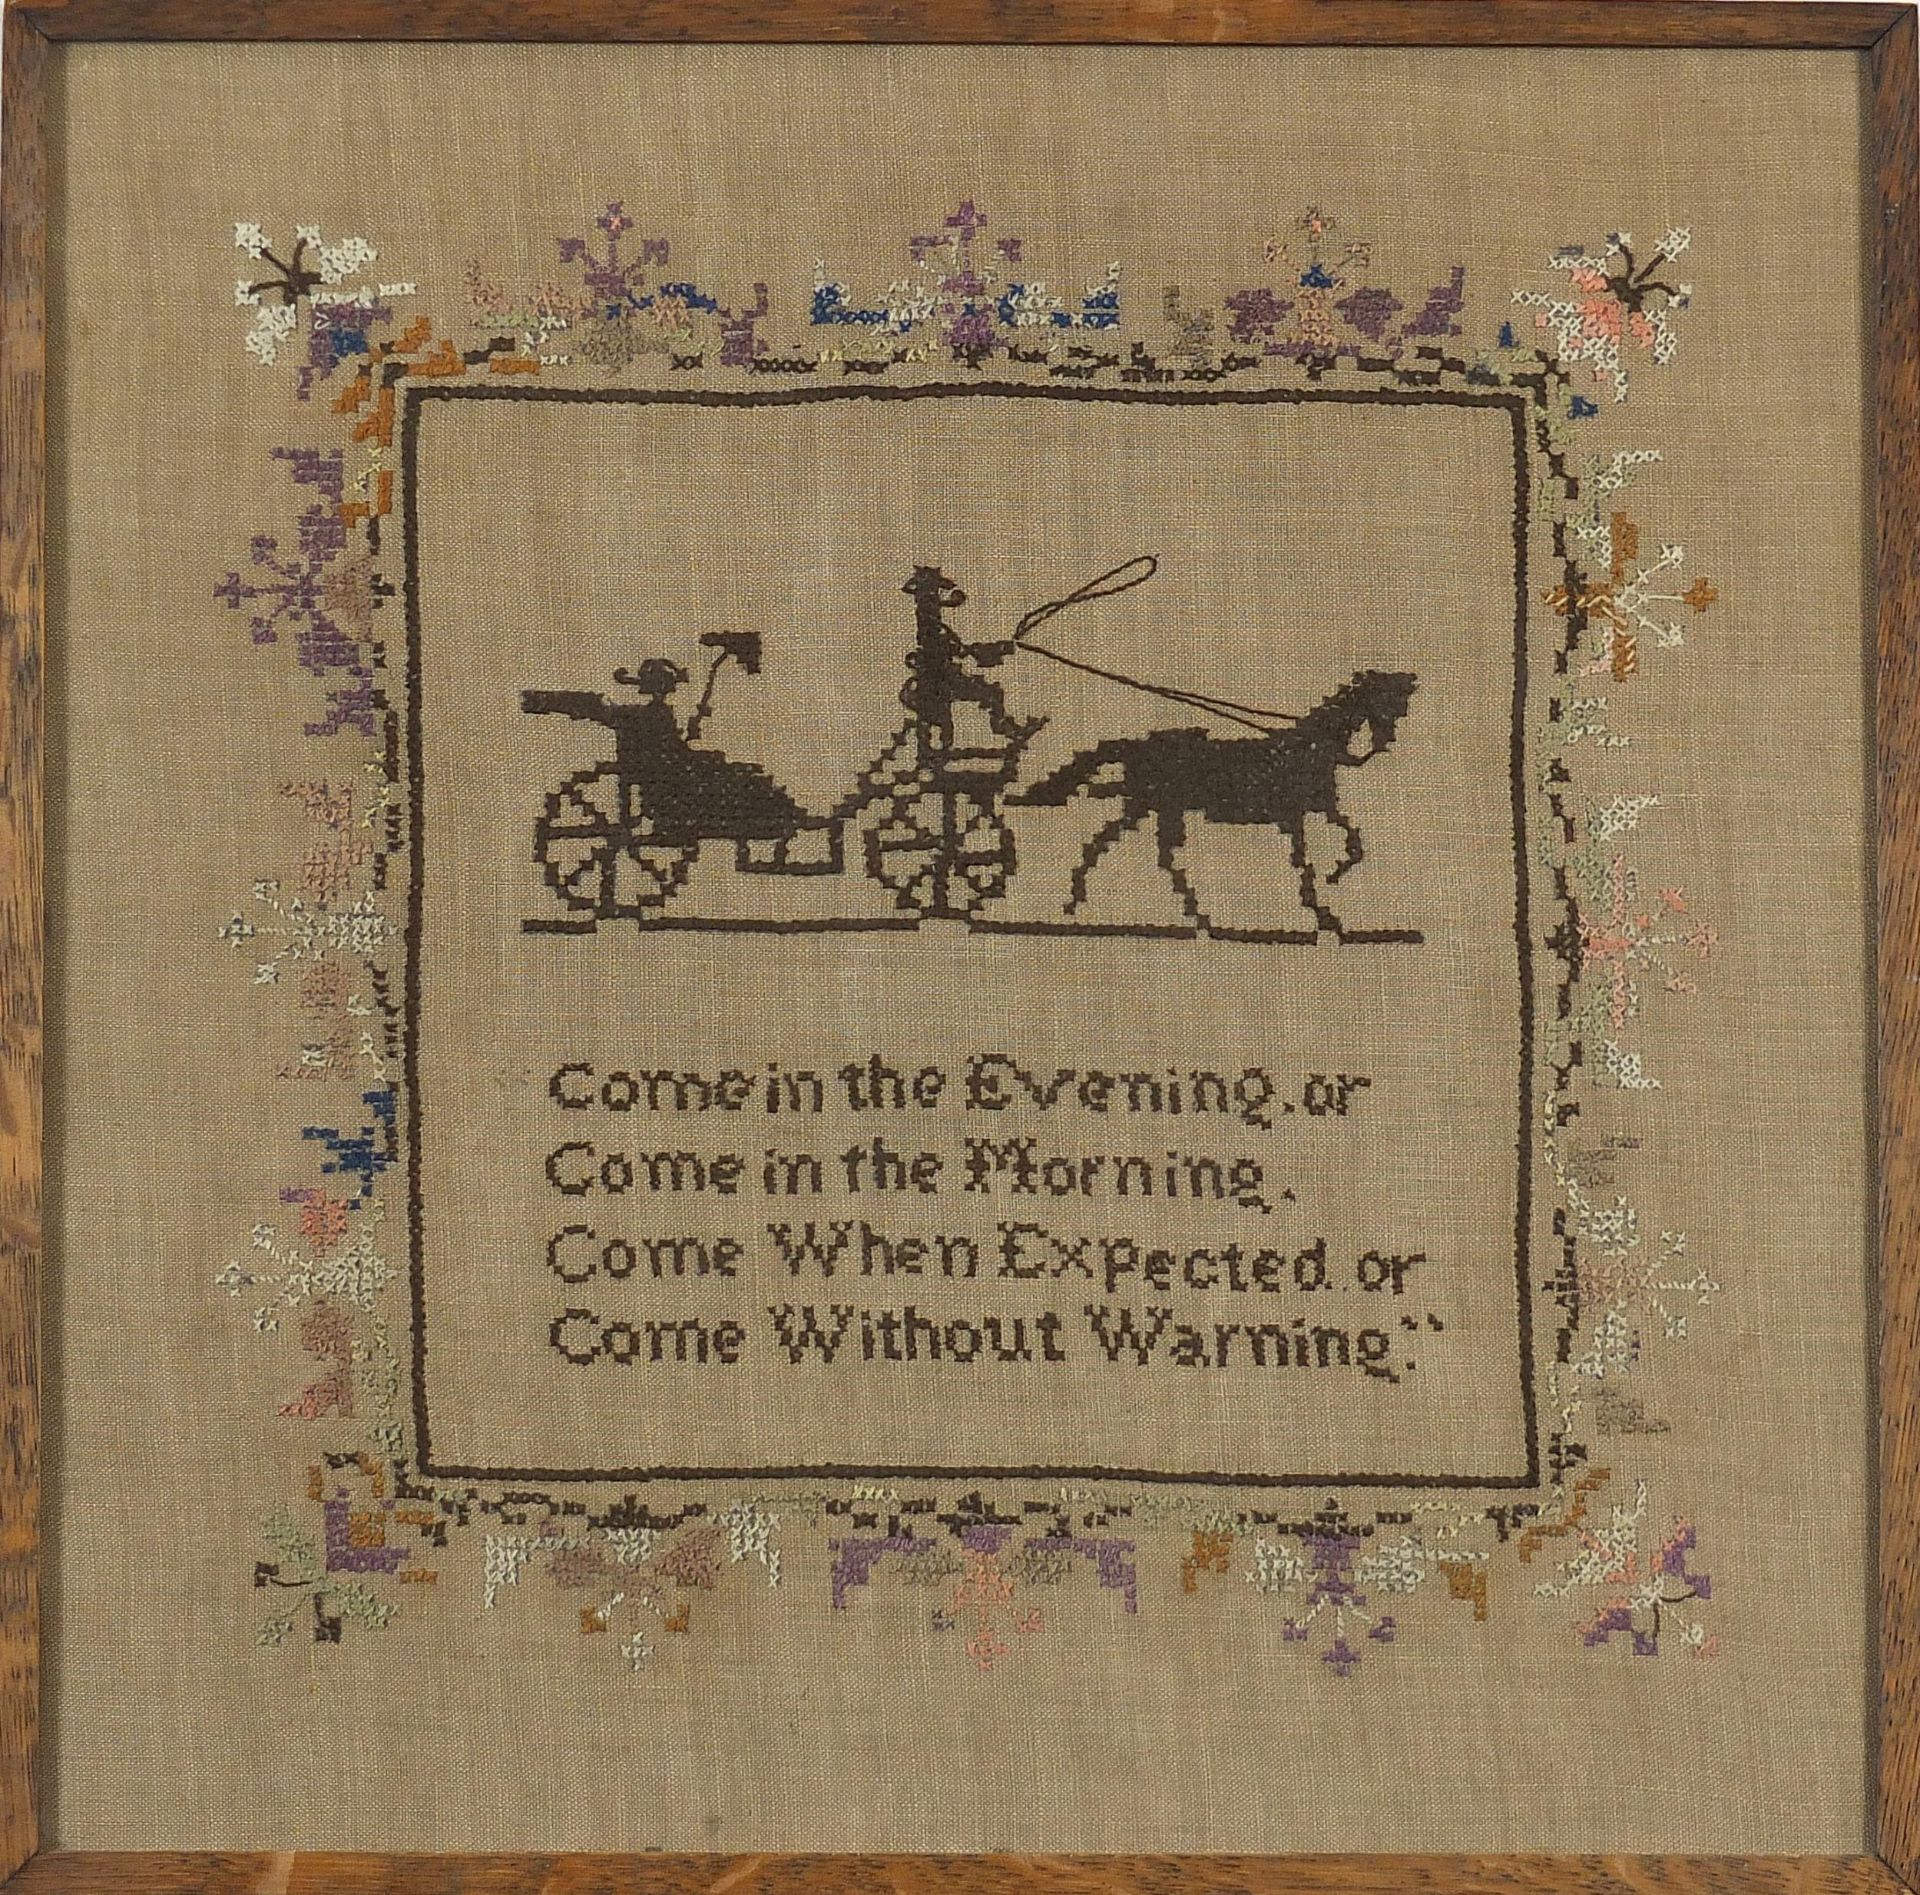 Antique cross stitch embroidery sampler with verse and horse and cart, framed and glazed, 38cm x - Image 2 of 3